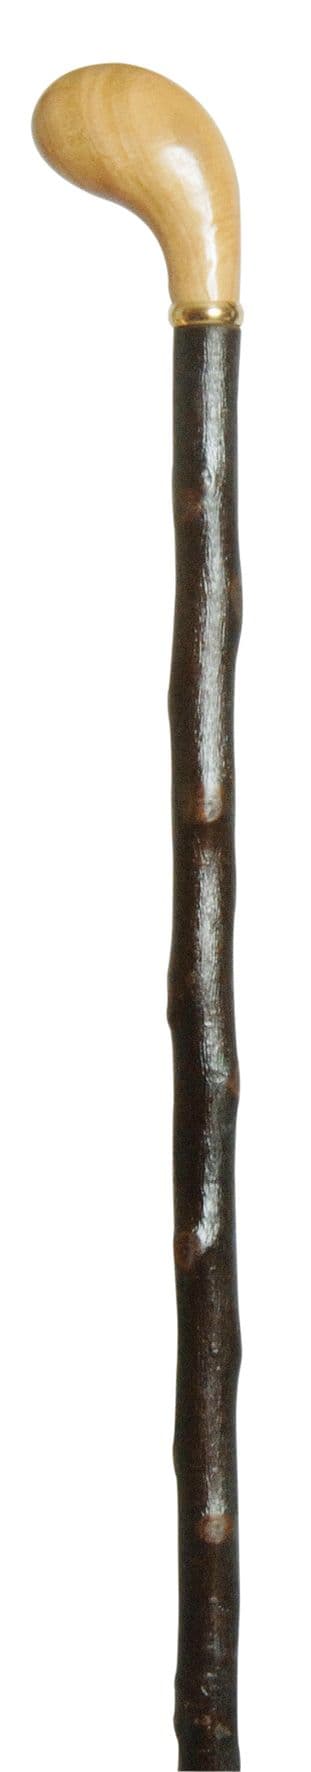 Classic Canes Pistol Grip Polished Beech with Hazel Shaft